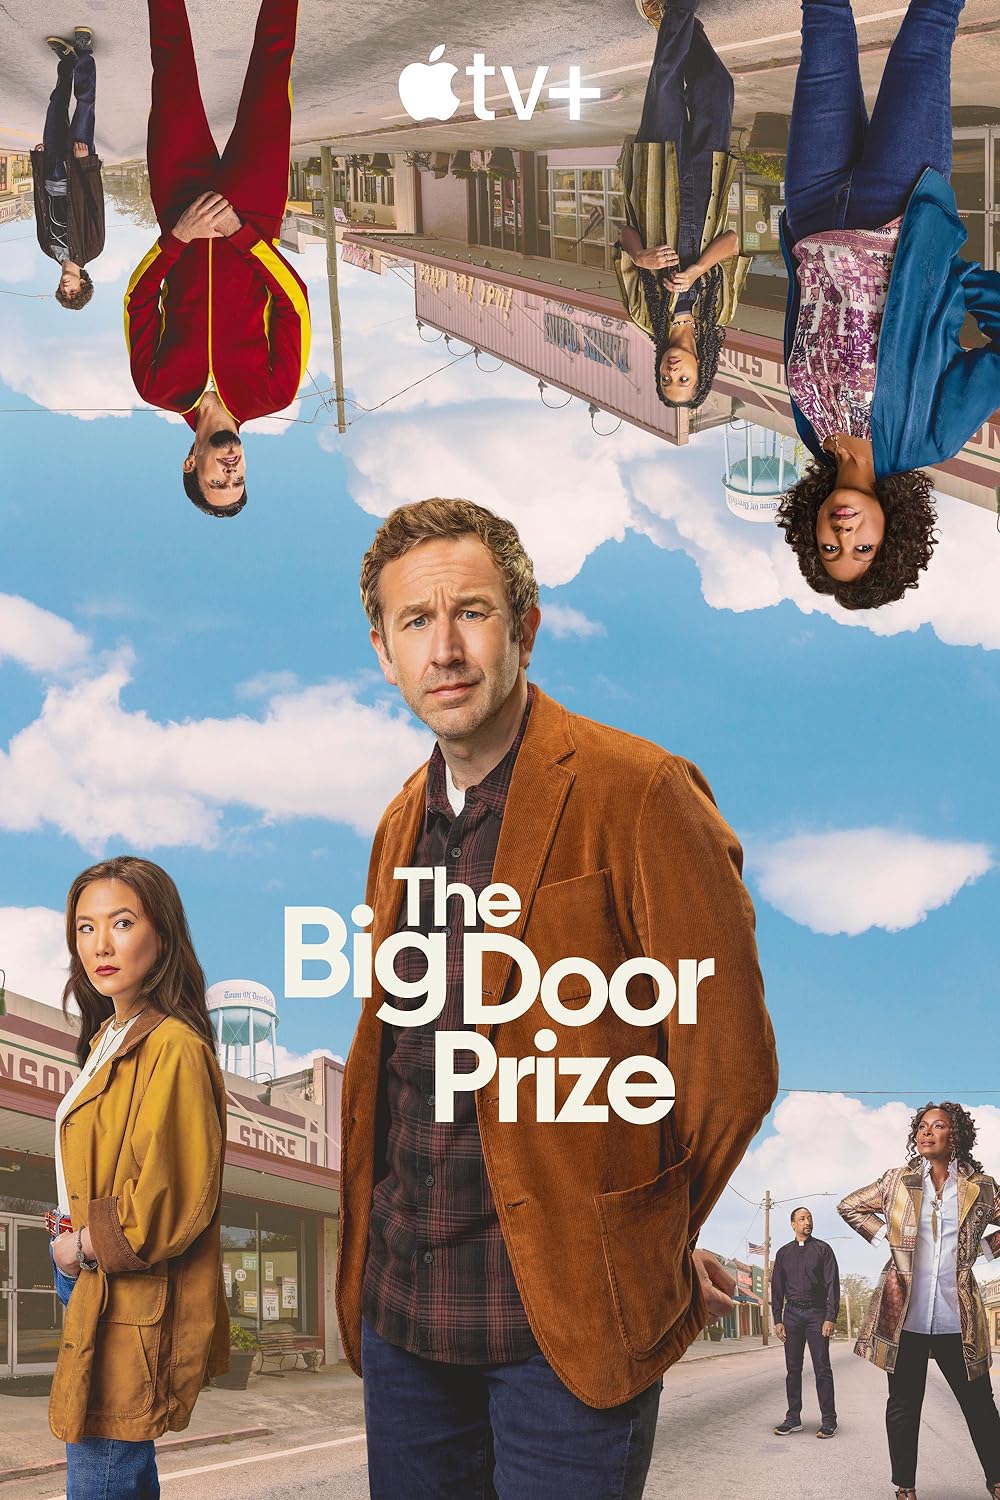 The Big Door Prize Season 2 (April 24, Apple TV+)Return to the quaint town of Deerfield in the second season of 